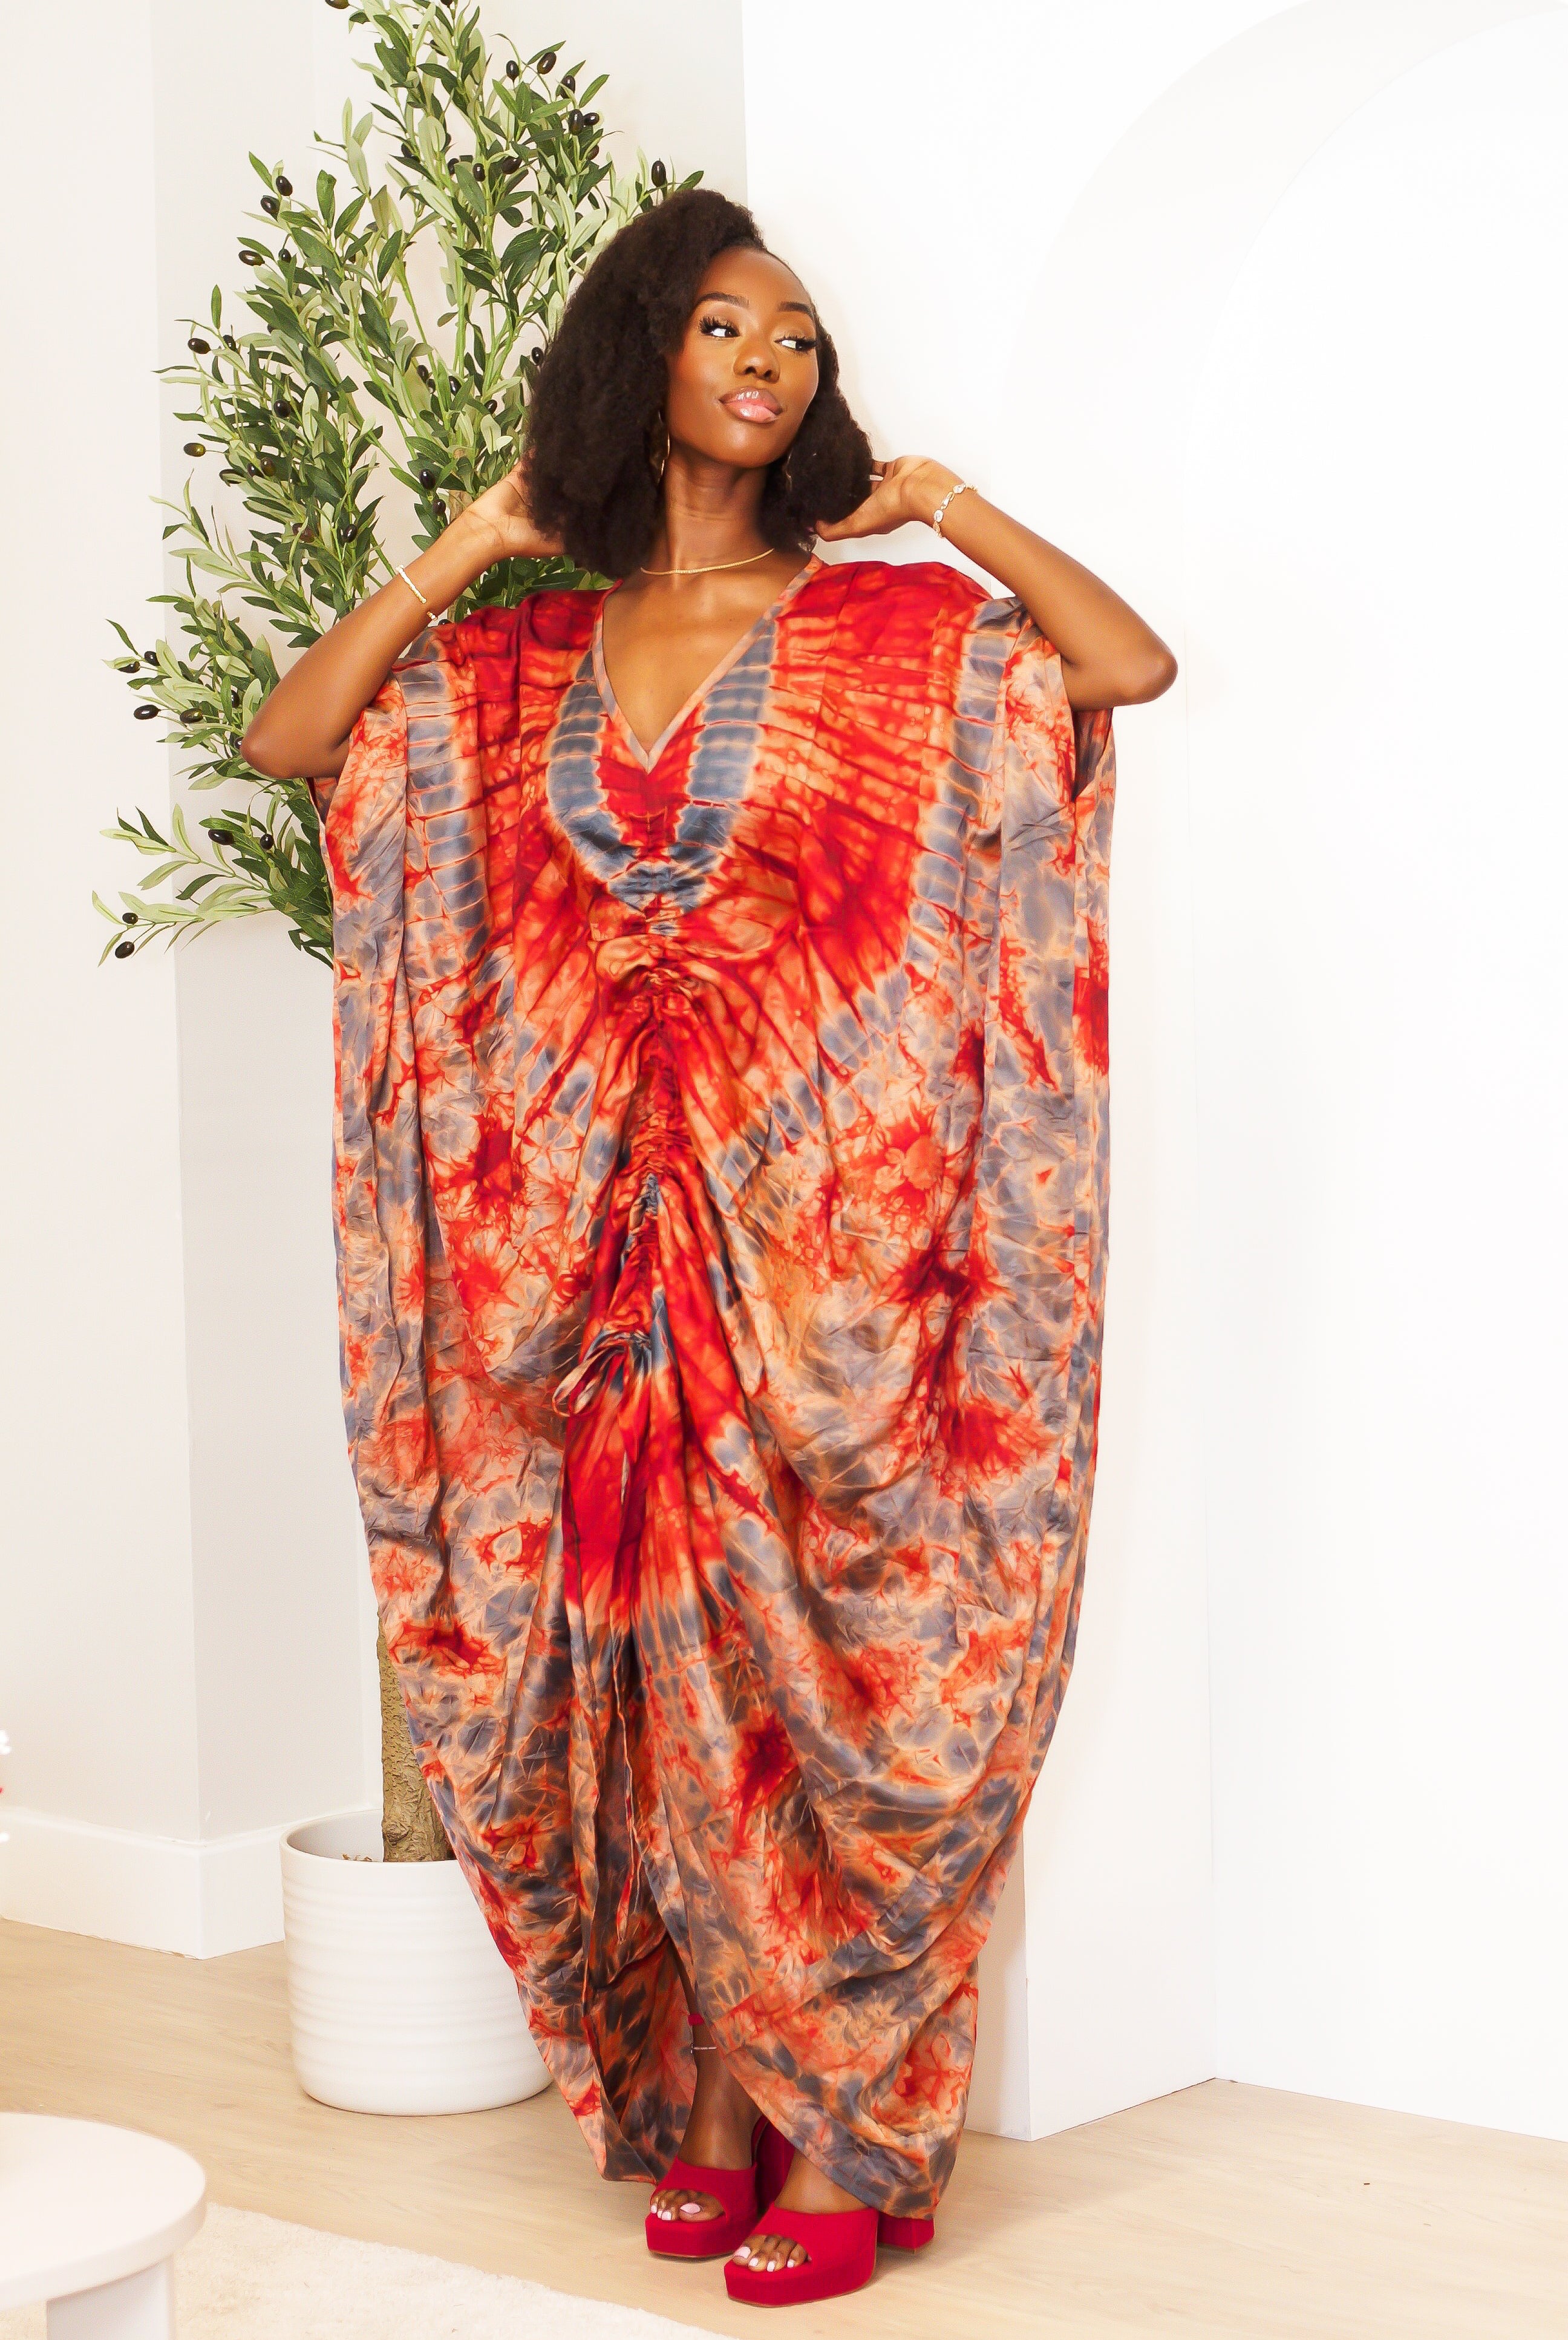 Shop CUMO London : African Clothing, African Dresses, African